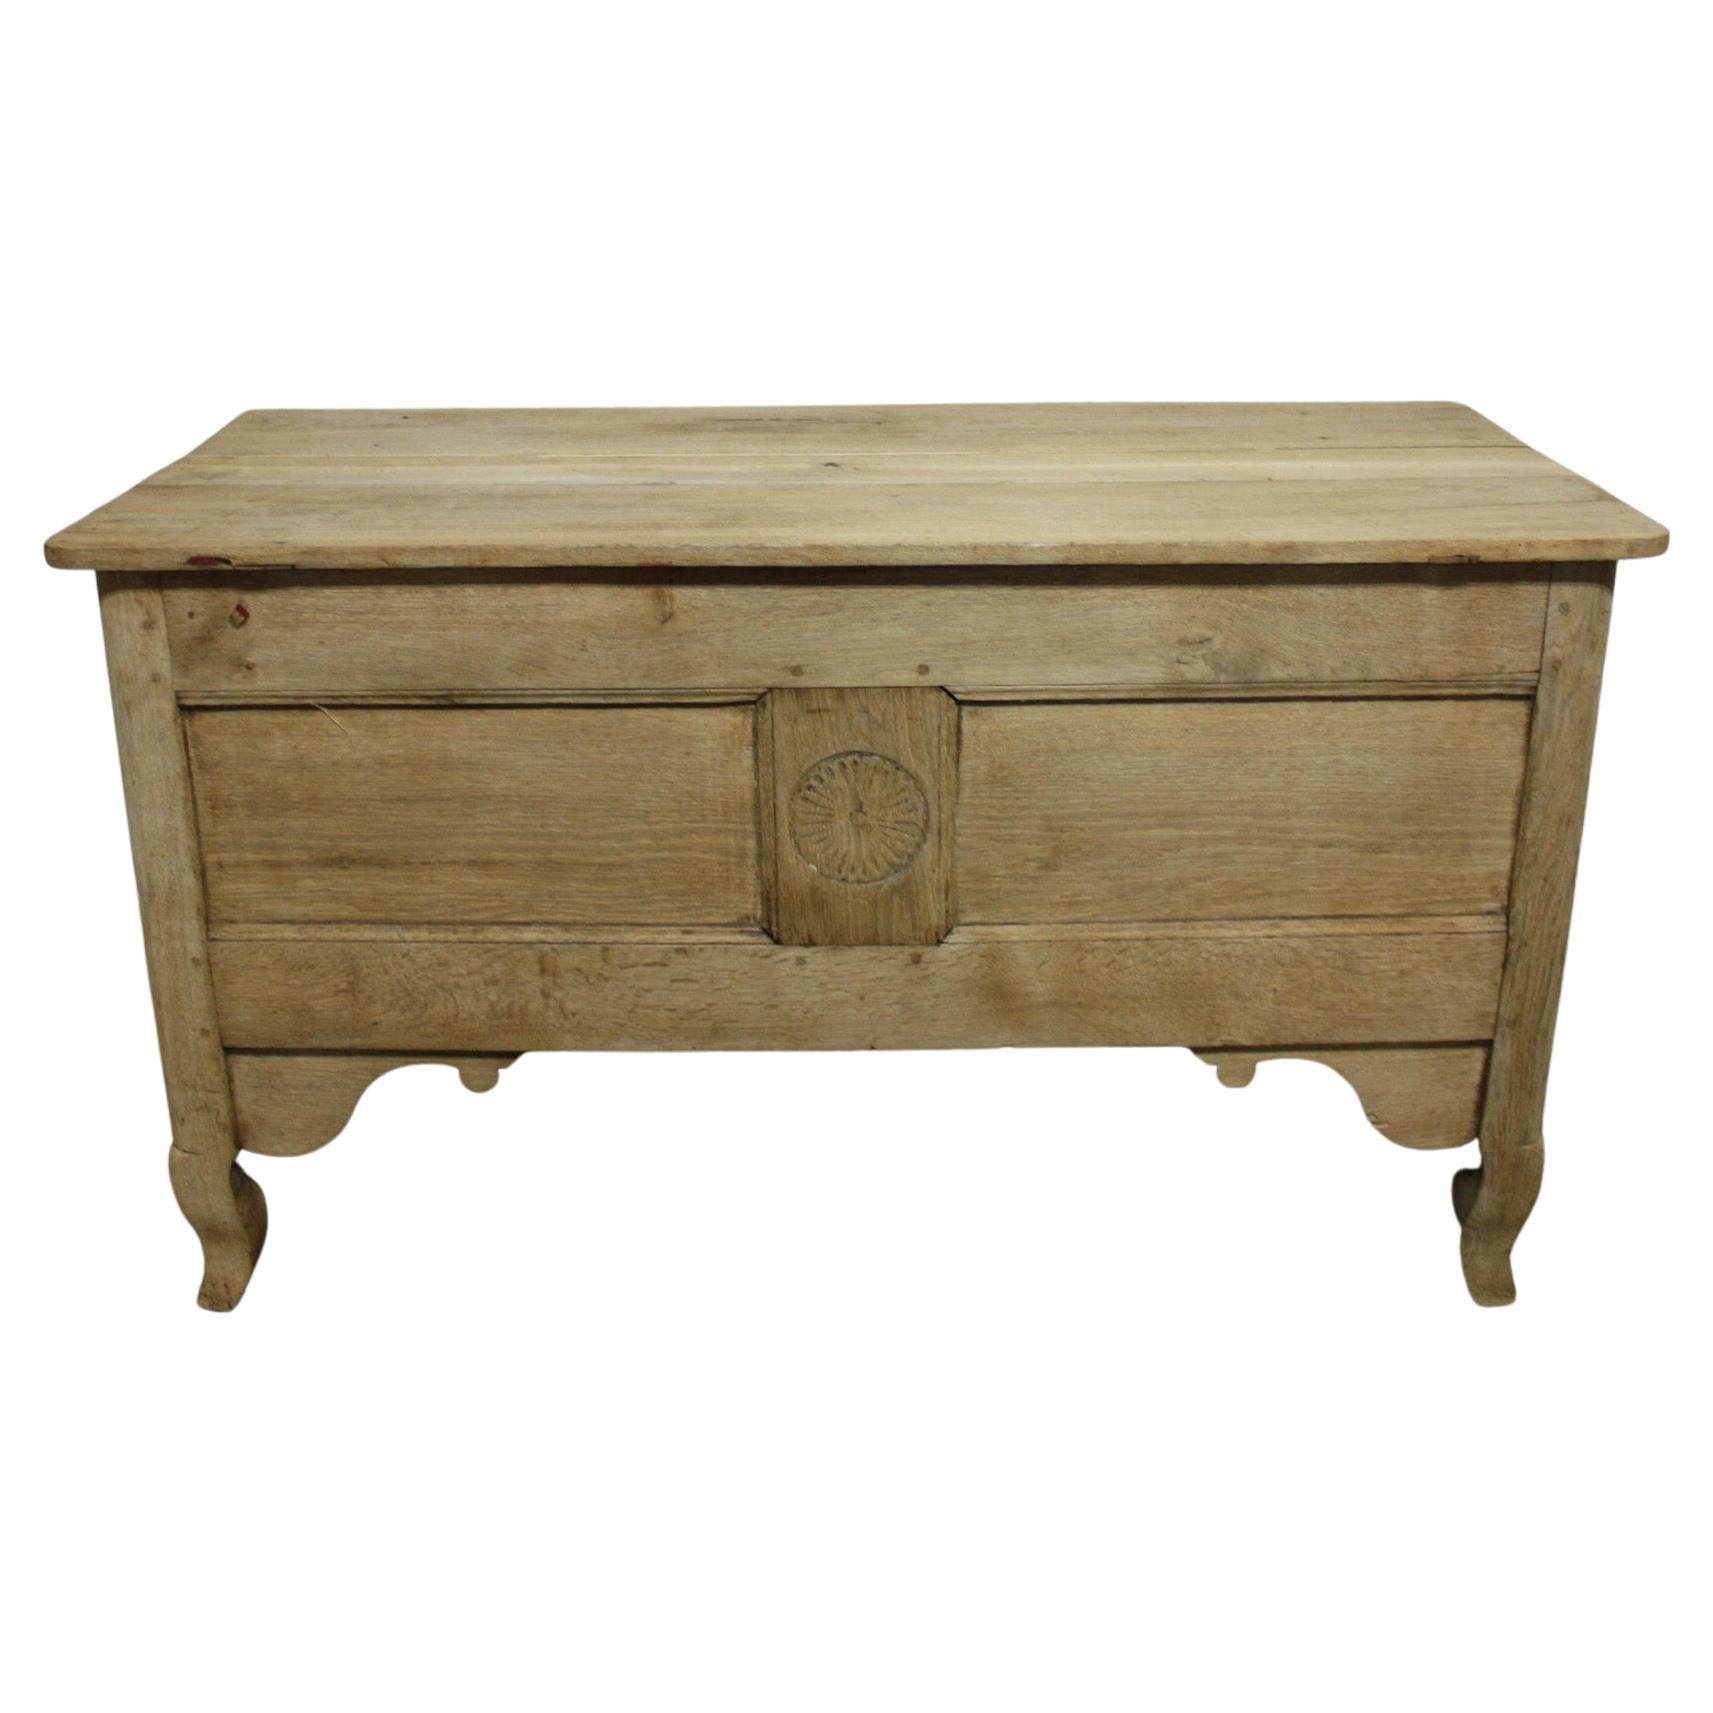 French 19th Century Blanket Chest or Trunk